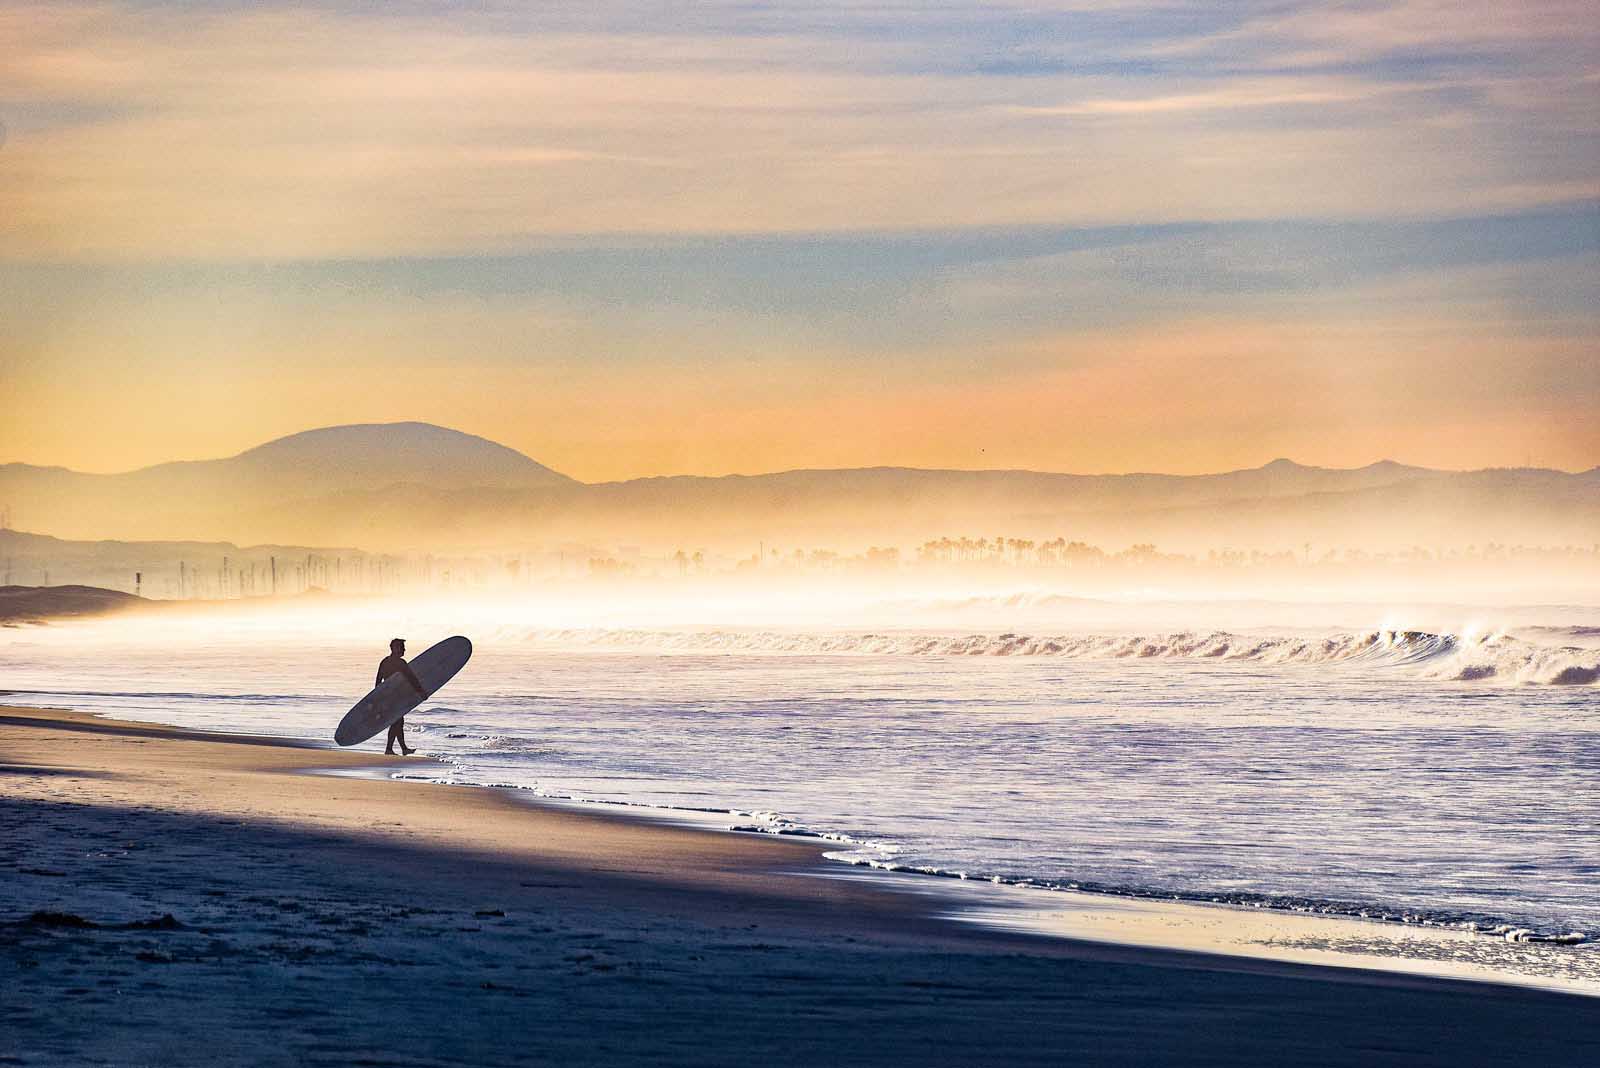 facts about california surfing culture